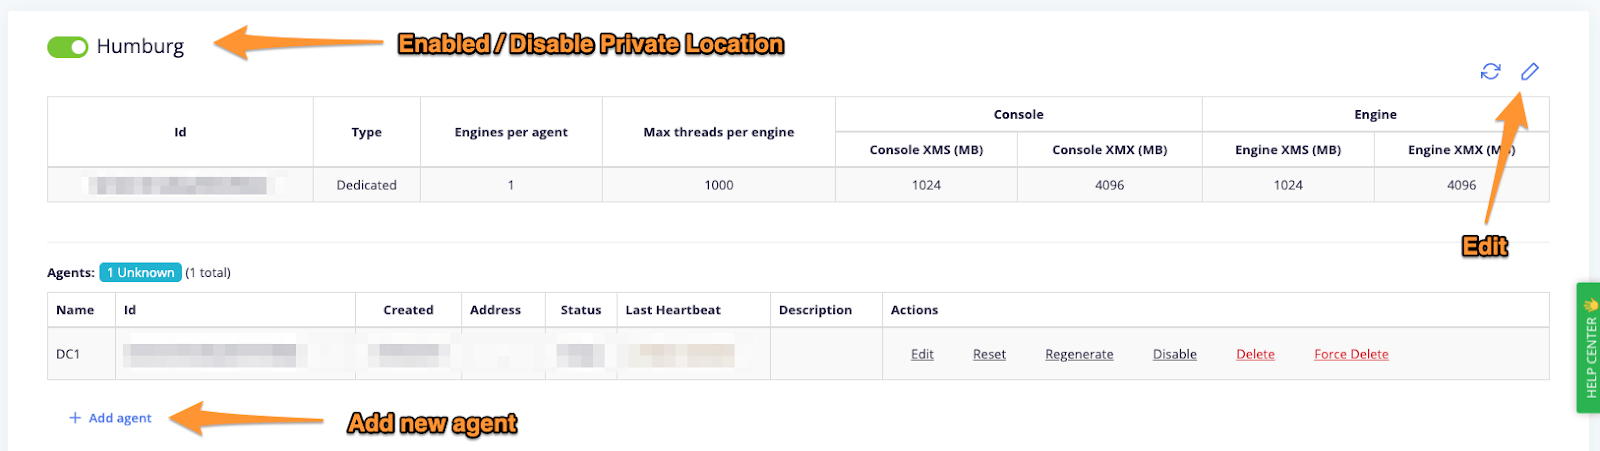 New UX on Private Locations Page